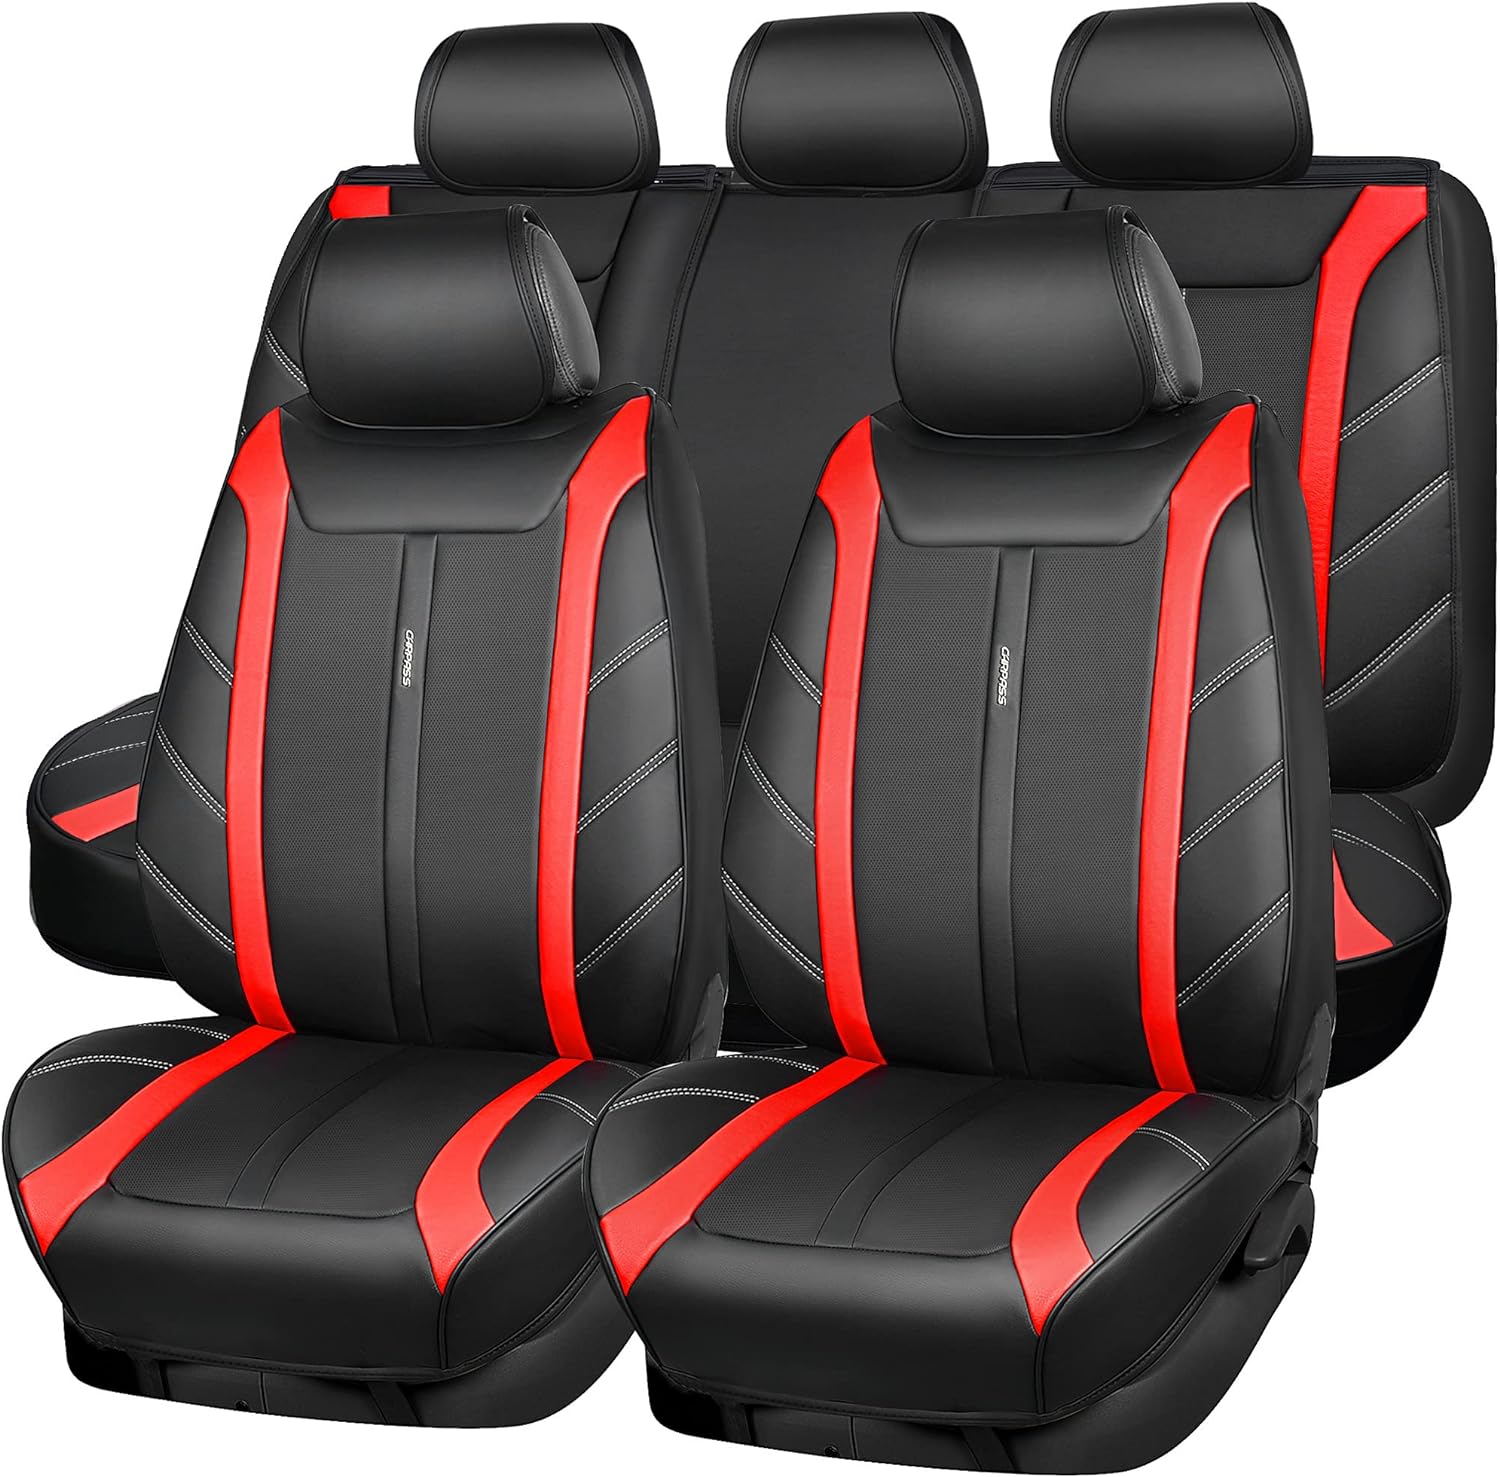 CAR PASS Leather Seat Cover Full Set Luxury Sporty Cushioned. Universal Waterproof Lychee Leatherette Car Seat Covers Fit for Most Sedans,SUV,Truck,Automotive Black and Fluorescent Green